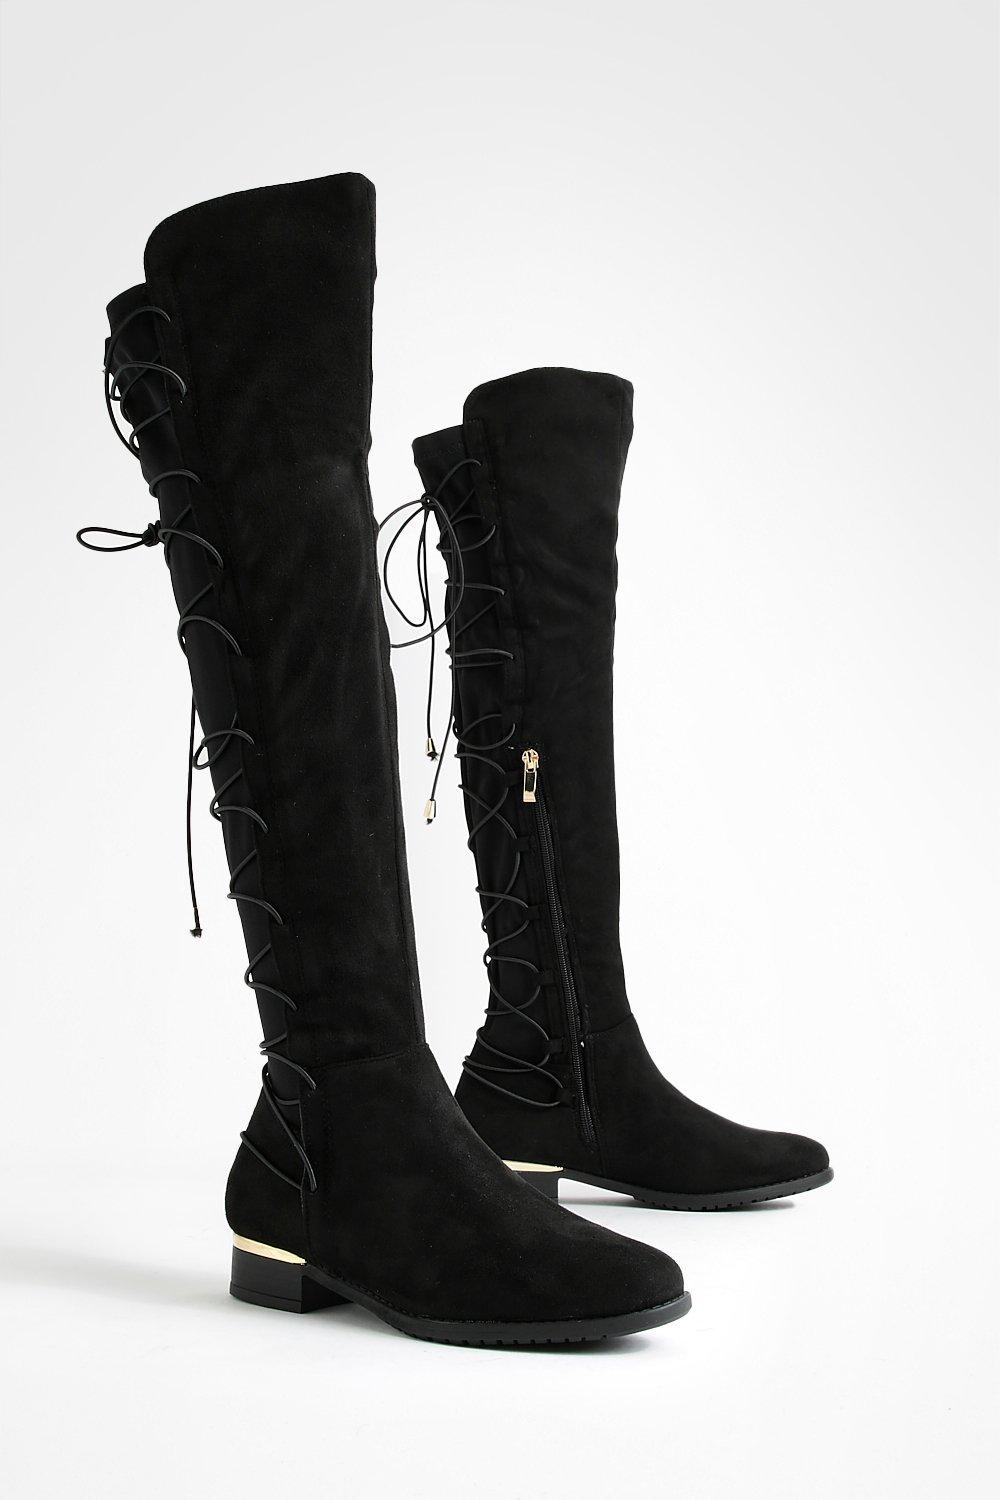 Bungee Lace Back Knee High Boots | boohoo